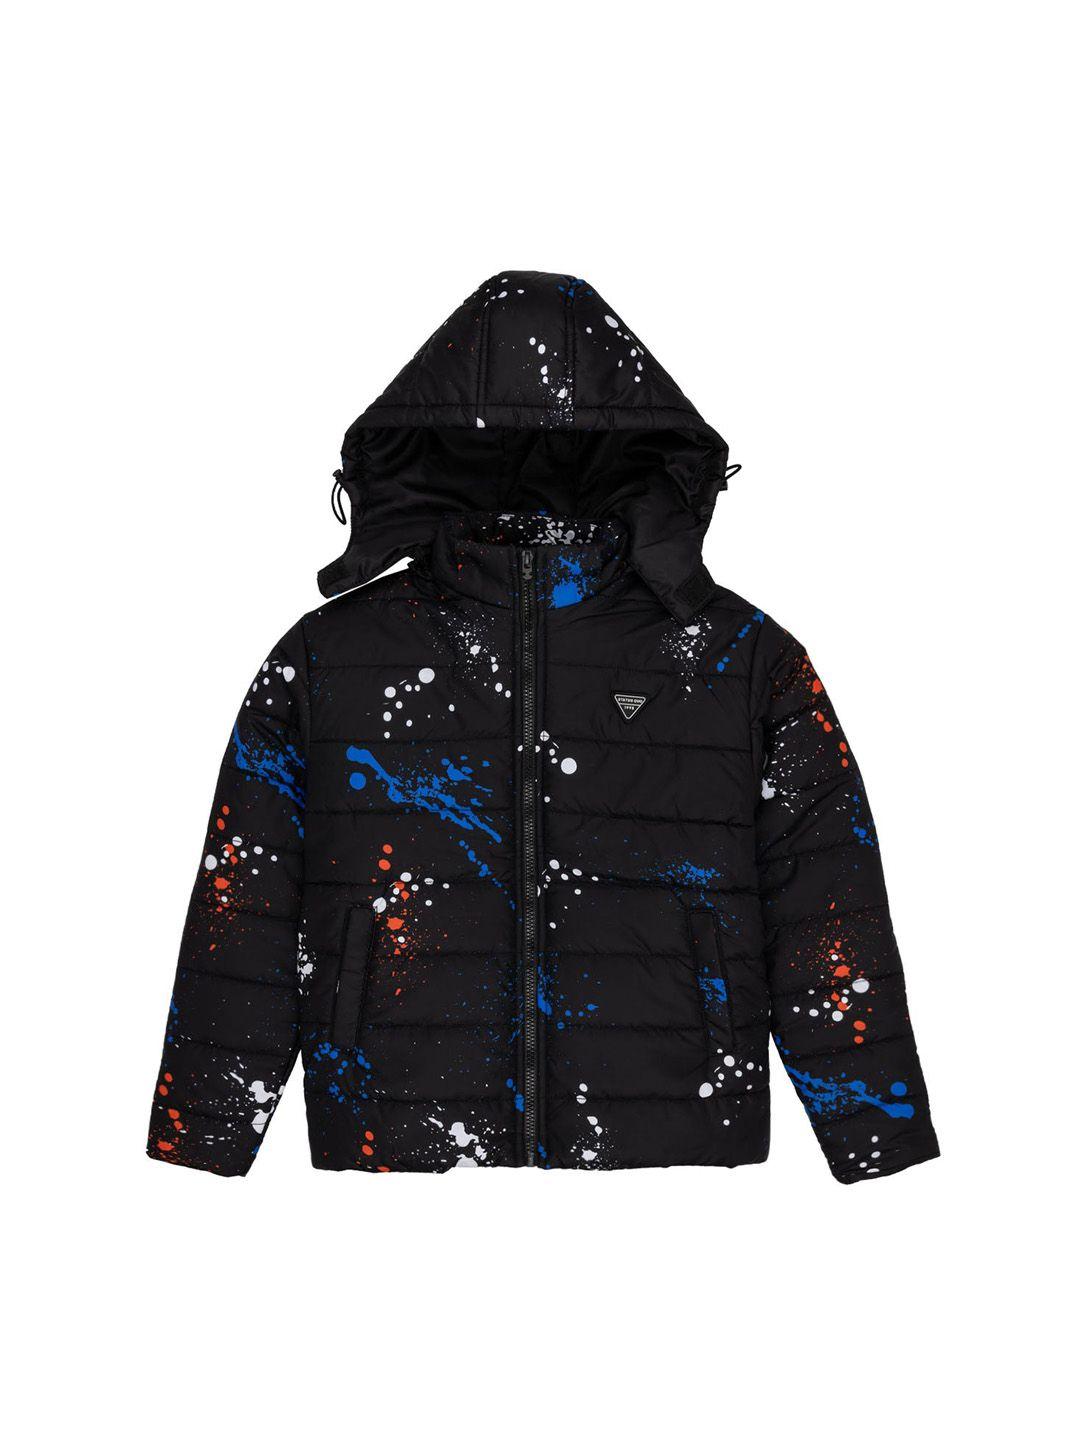 status quo boys abstract printed hooded puffer jacket